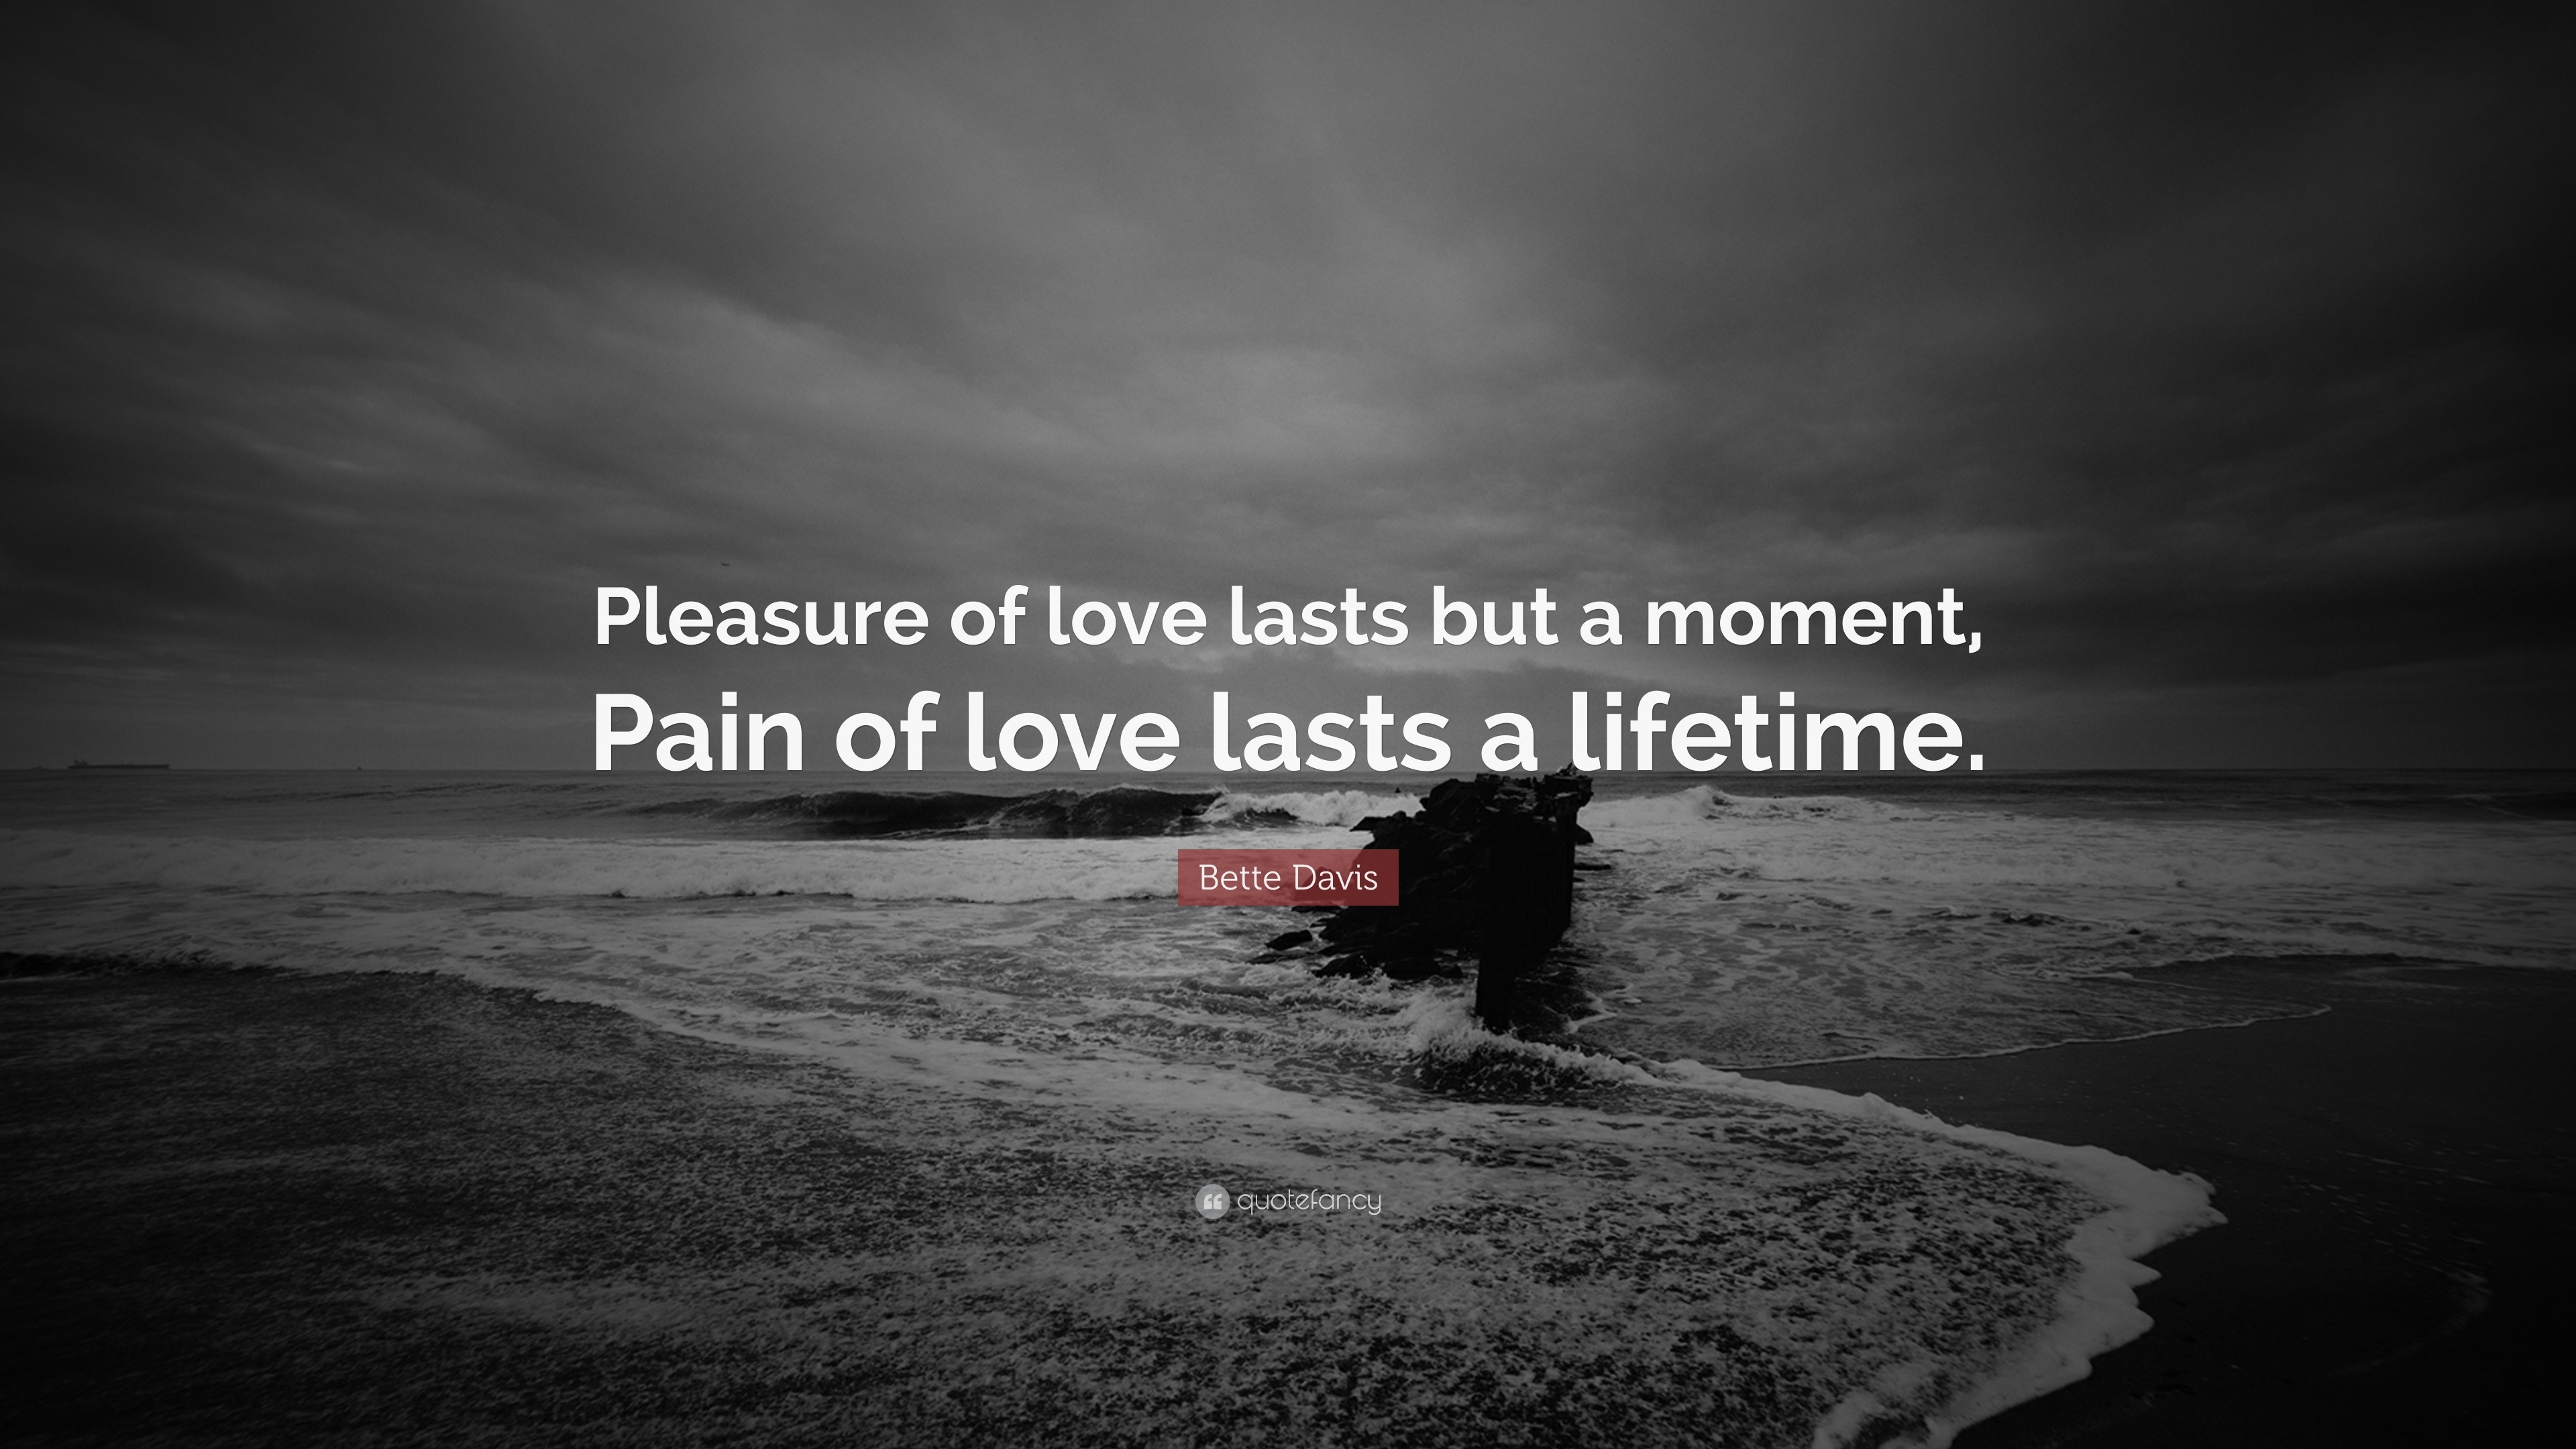 Breakup Quotes “Pleasure of love lasts but a moment Pain of love lasts